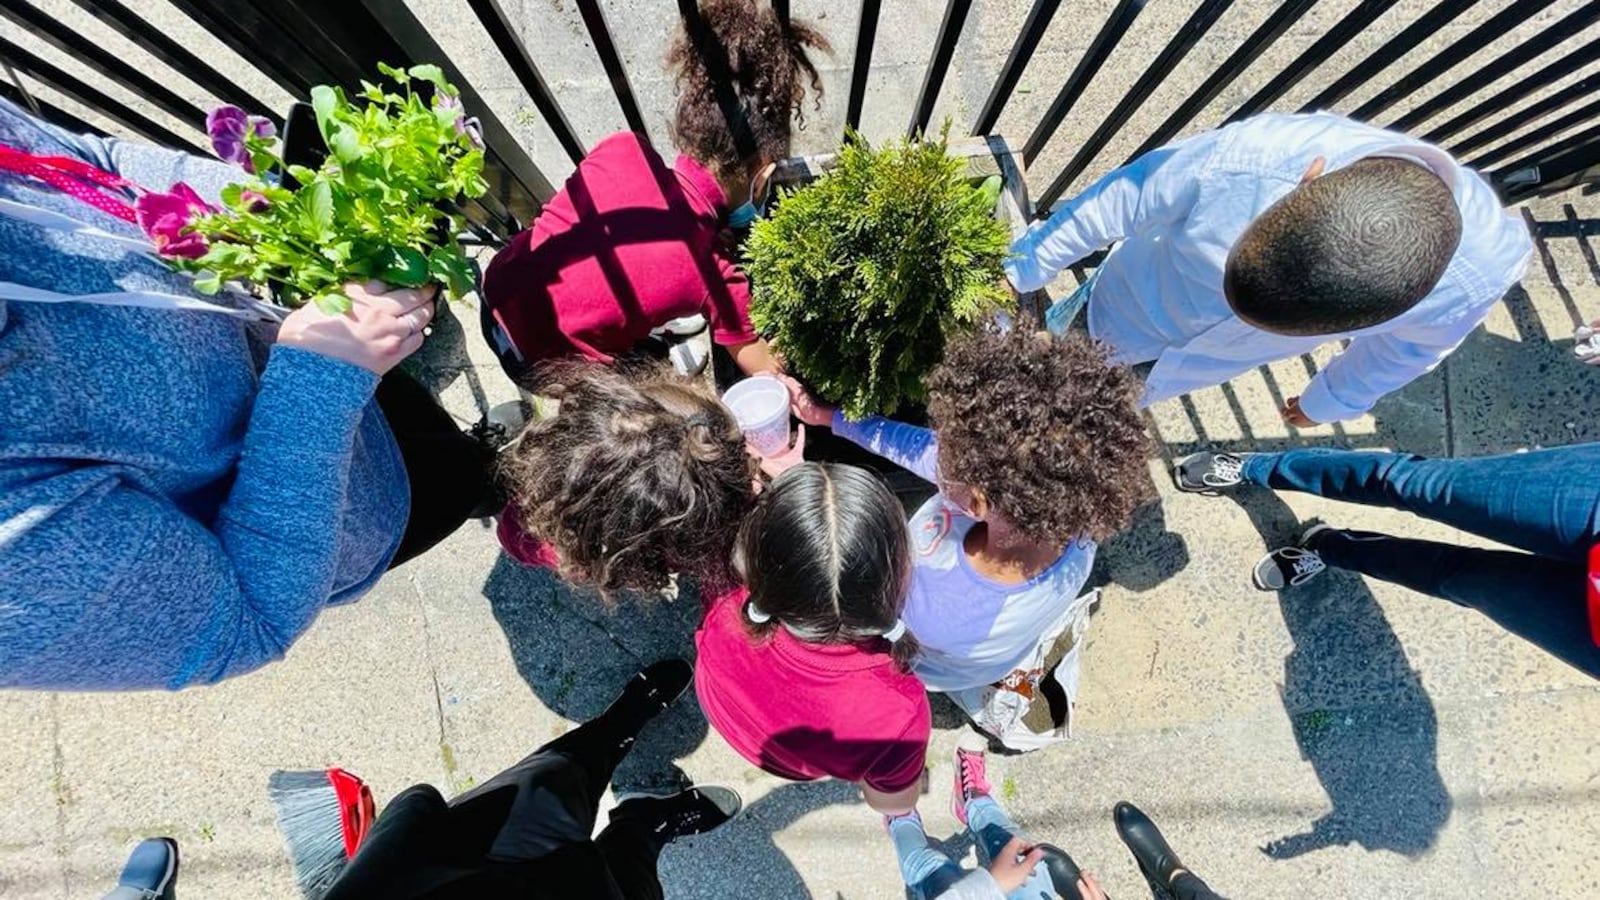 A group of students with colorful shirts hold lush green plants while standing on a sidewalk.